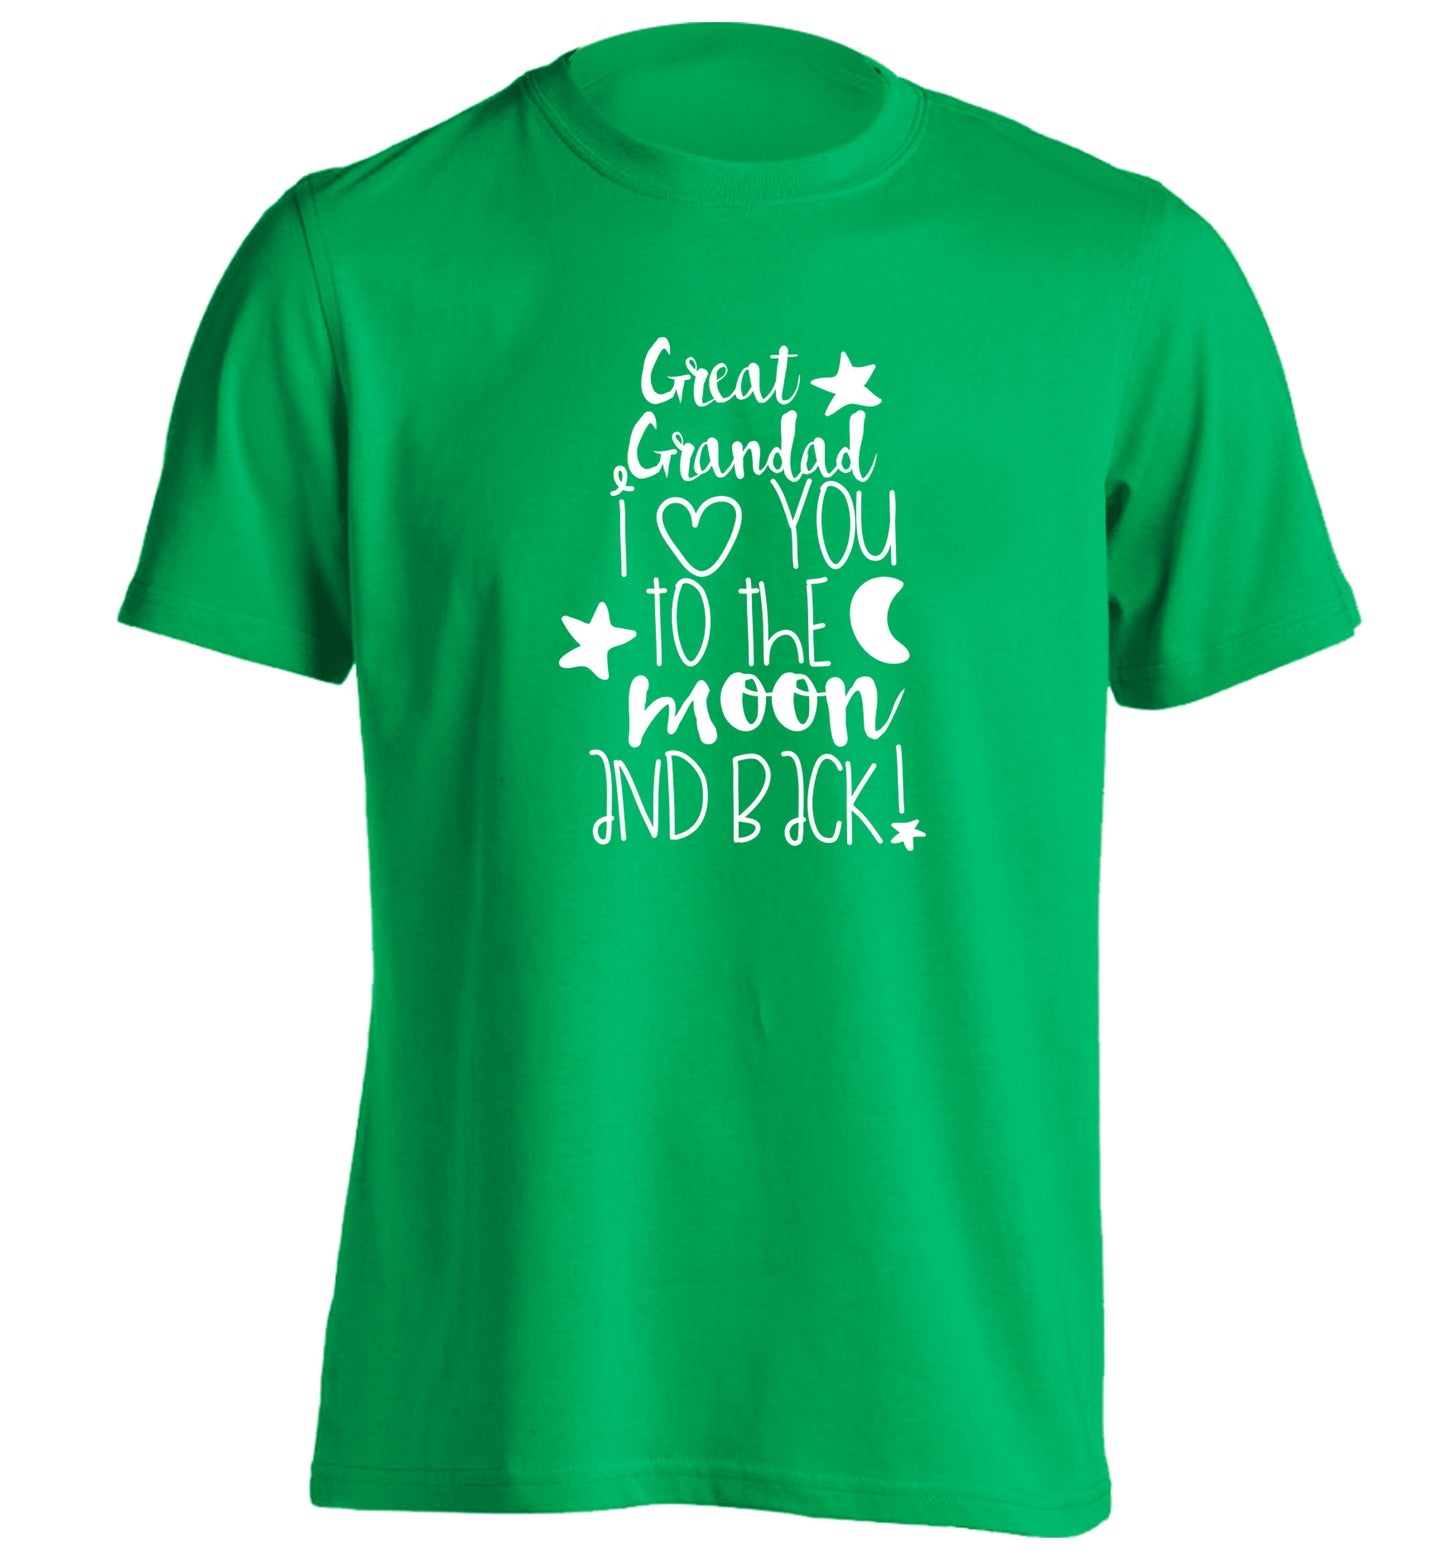 Great Grandad I love you to the moon and back adults unisex green Tshirt 2XL